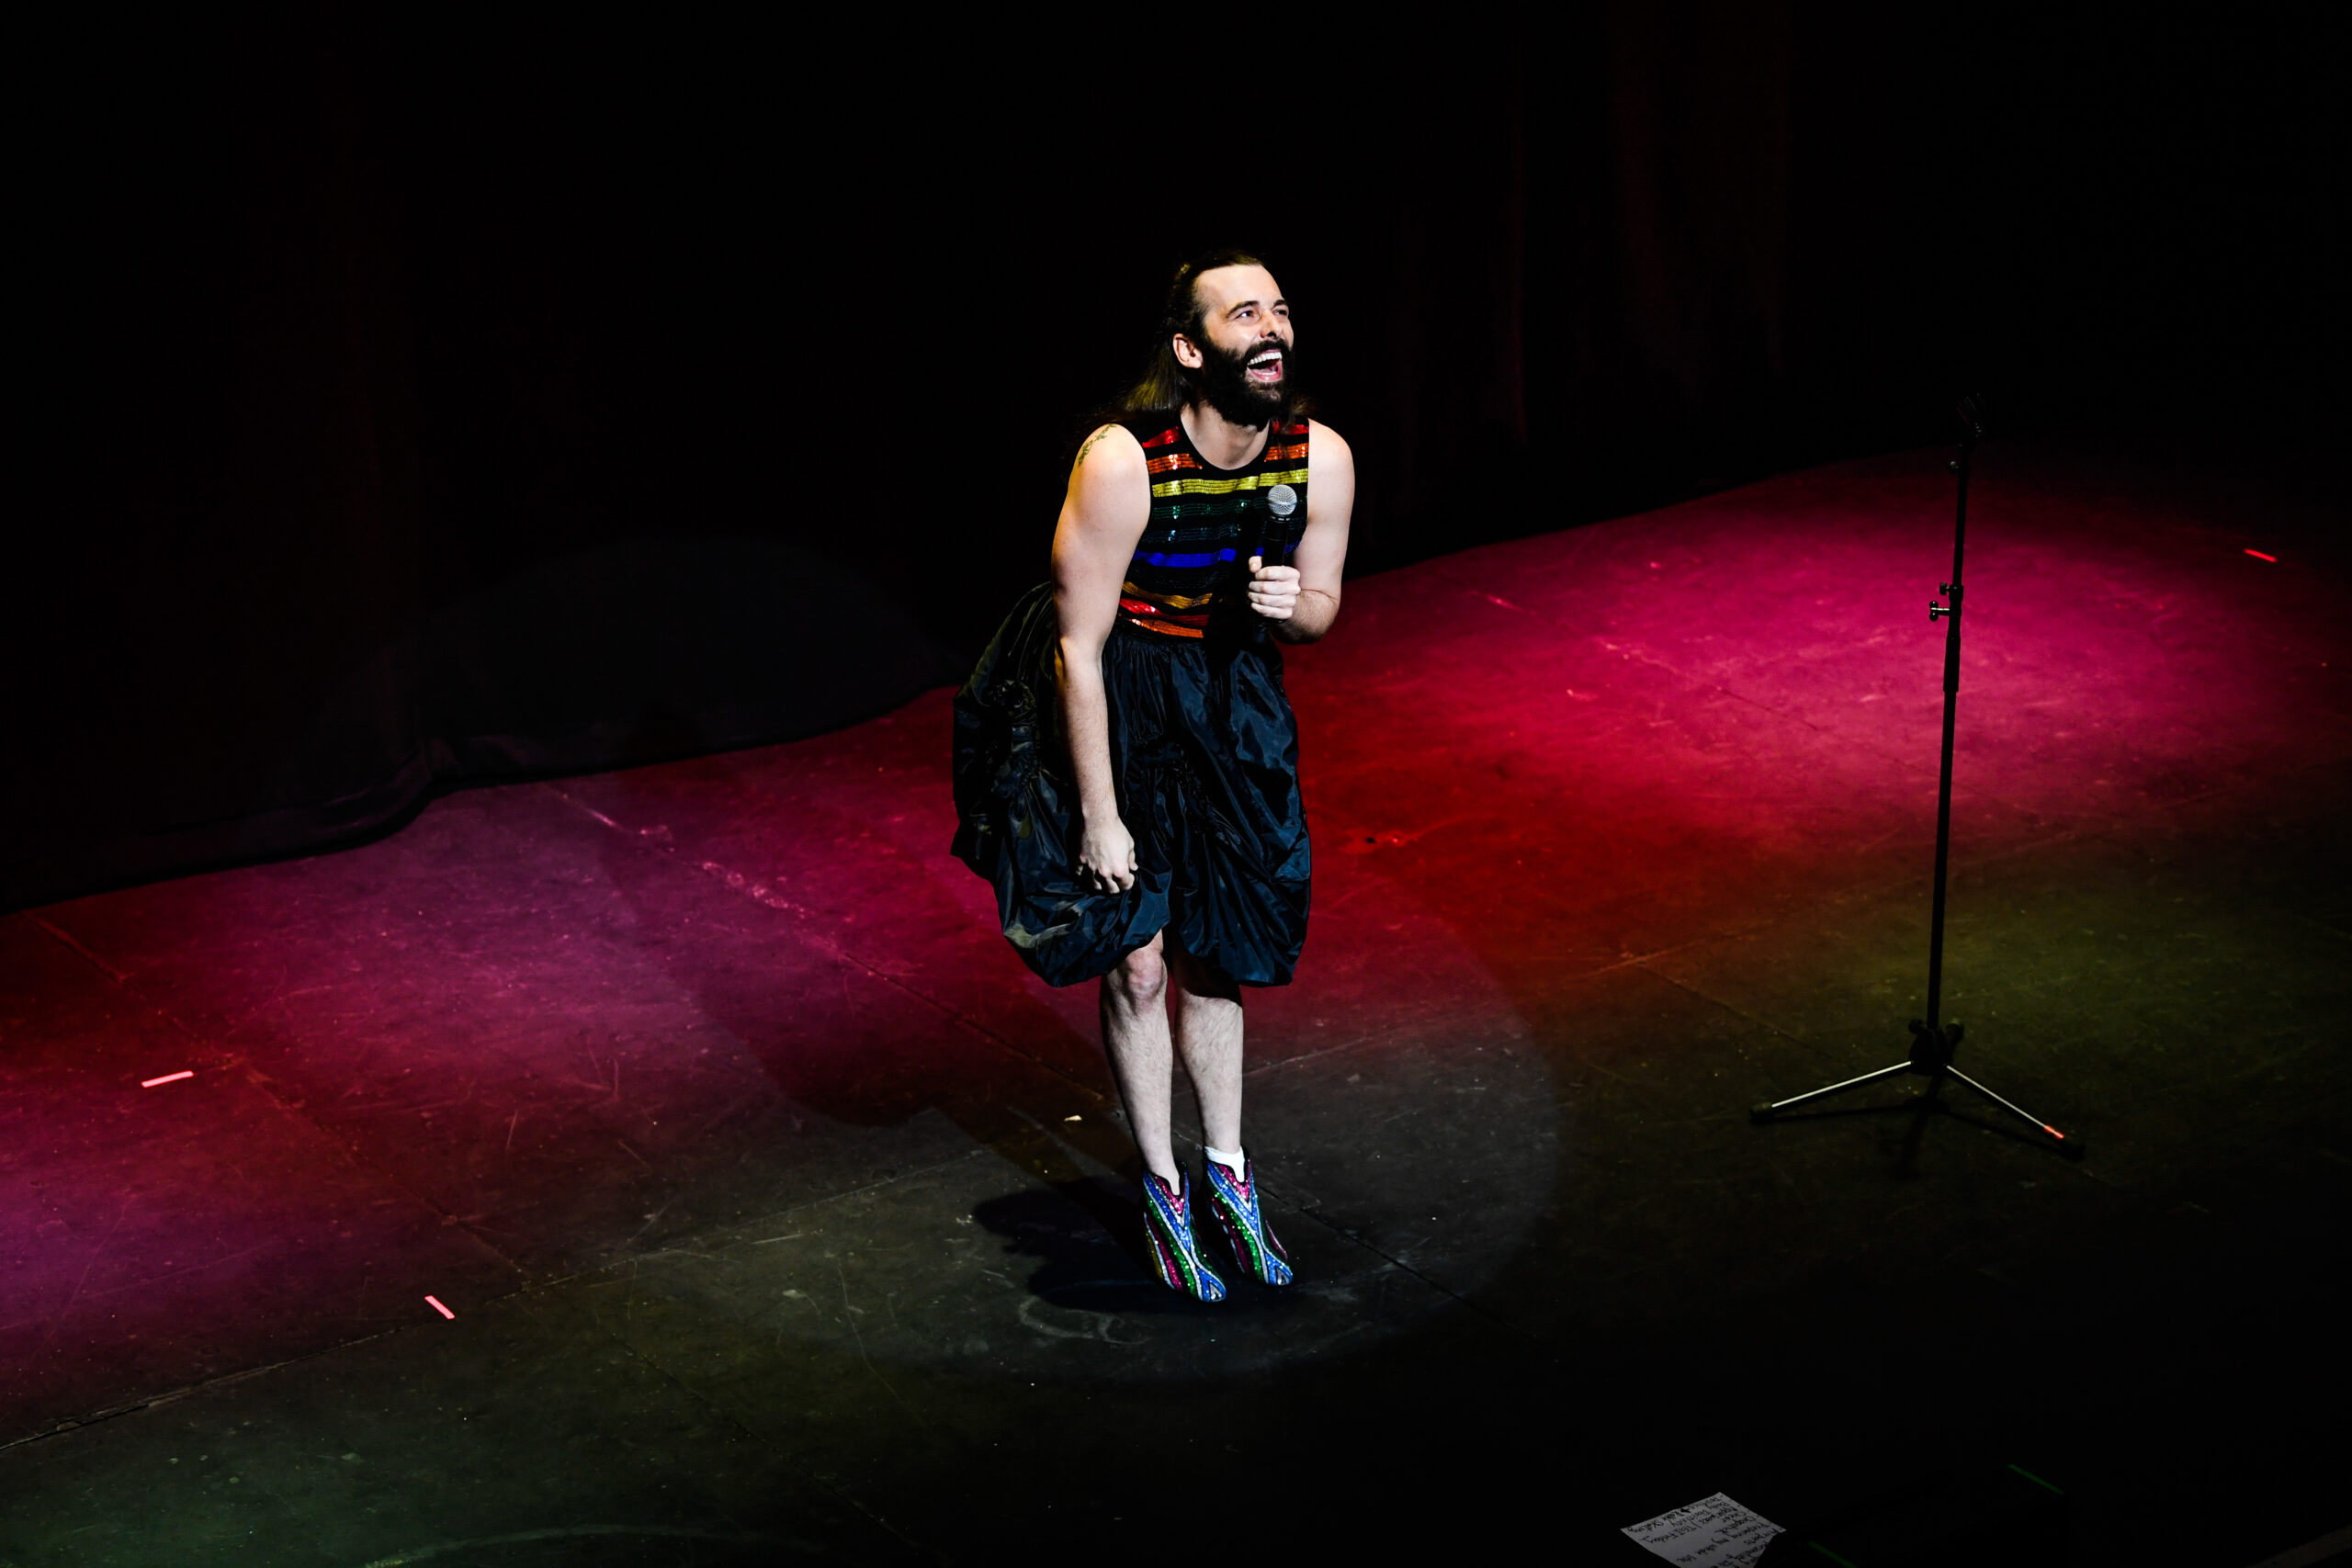 JVN at Dublib’s Olympia. Photography by Ruth Medjber @ruthlessimagery